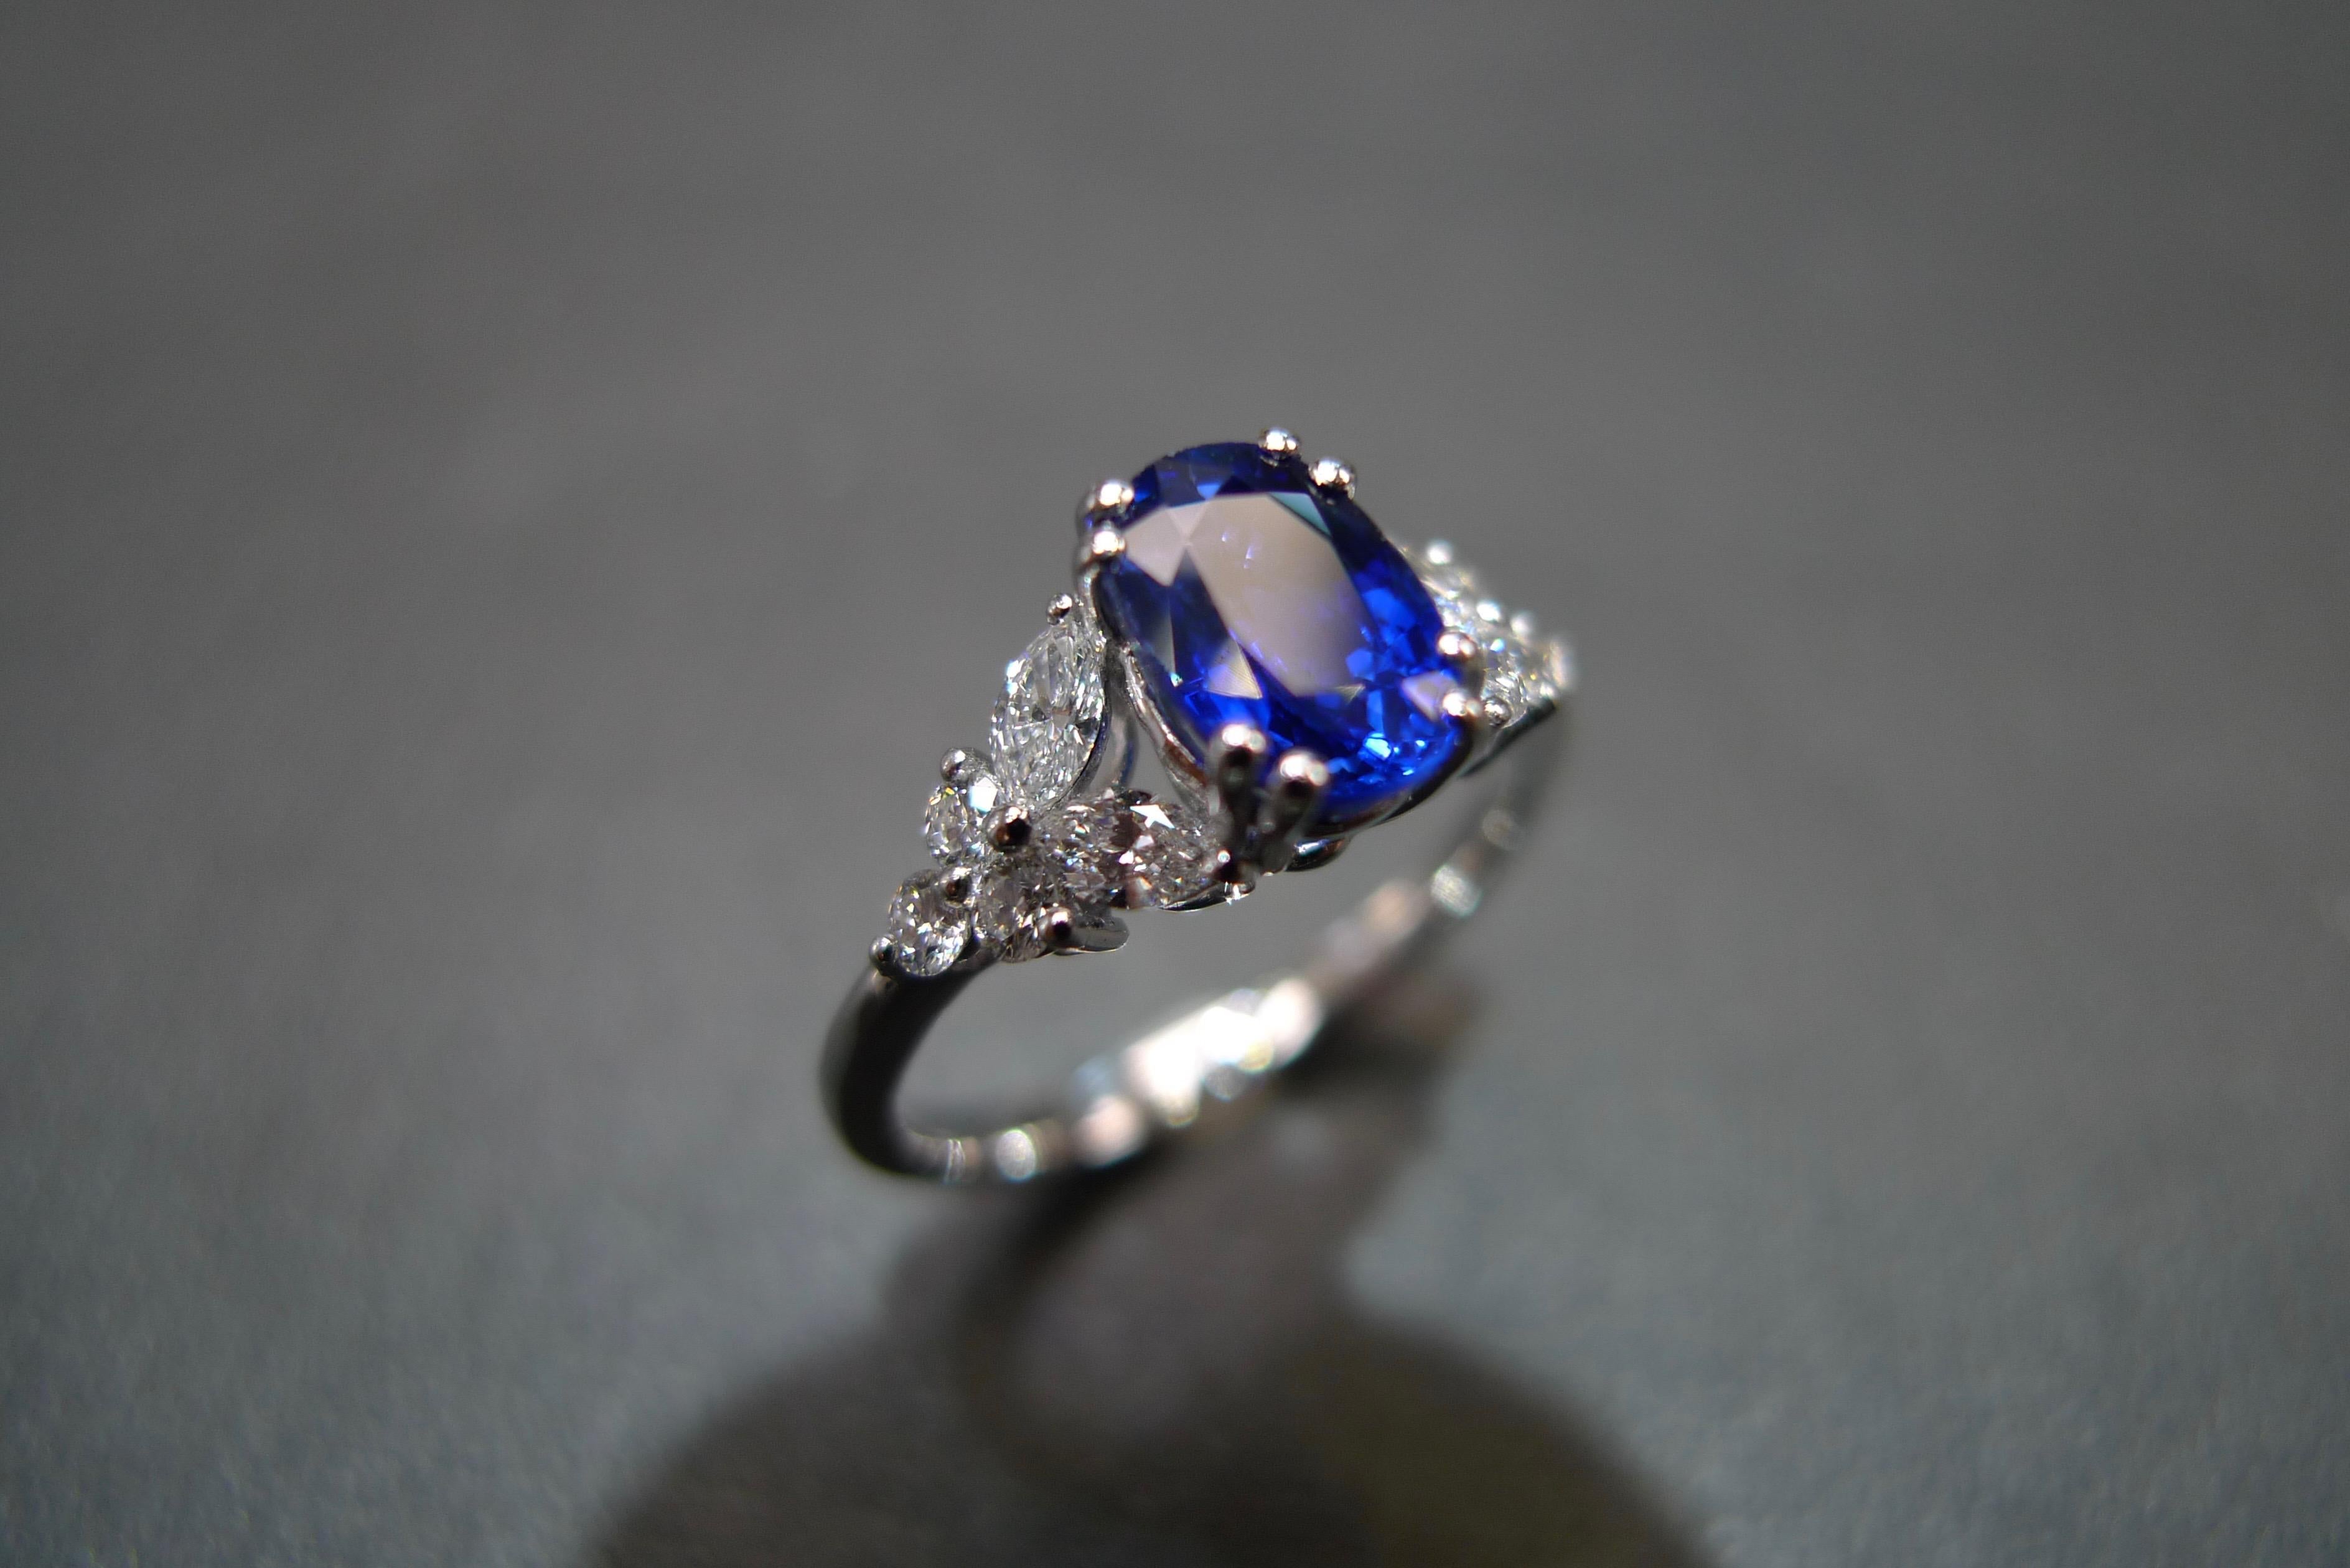 For Sale:  Blue Sapphire Engagement Ring with Marquise Cut Diamond in 18K White Gold 2